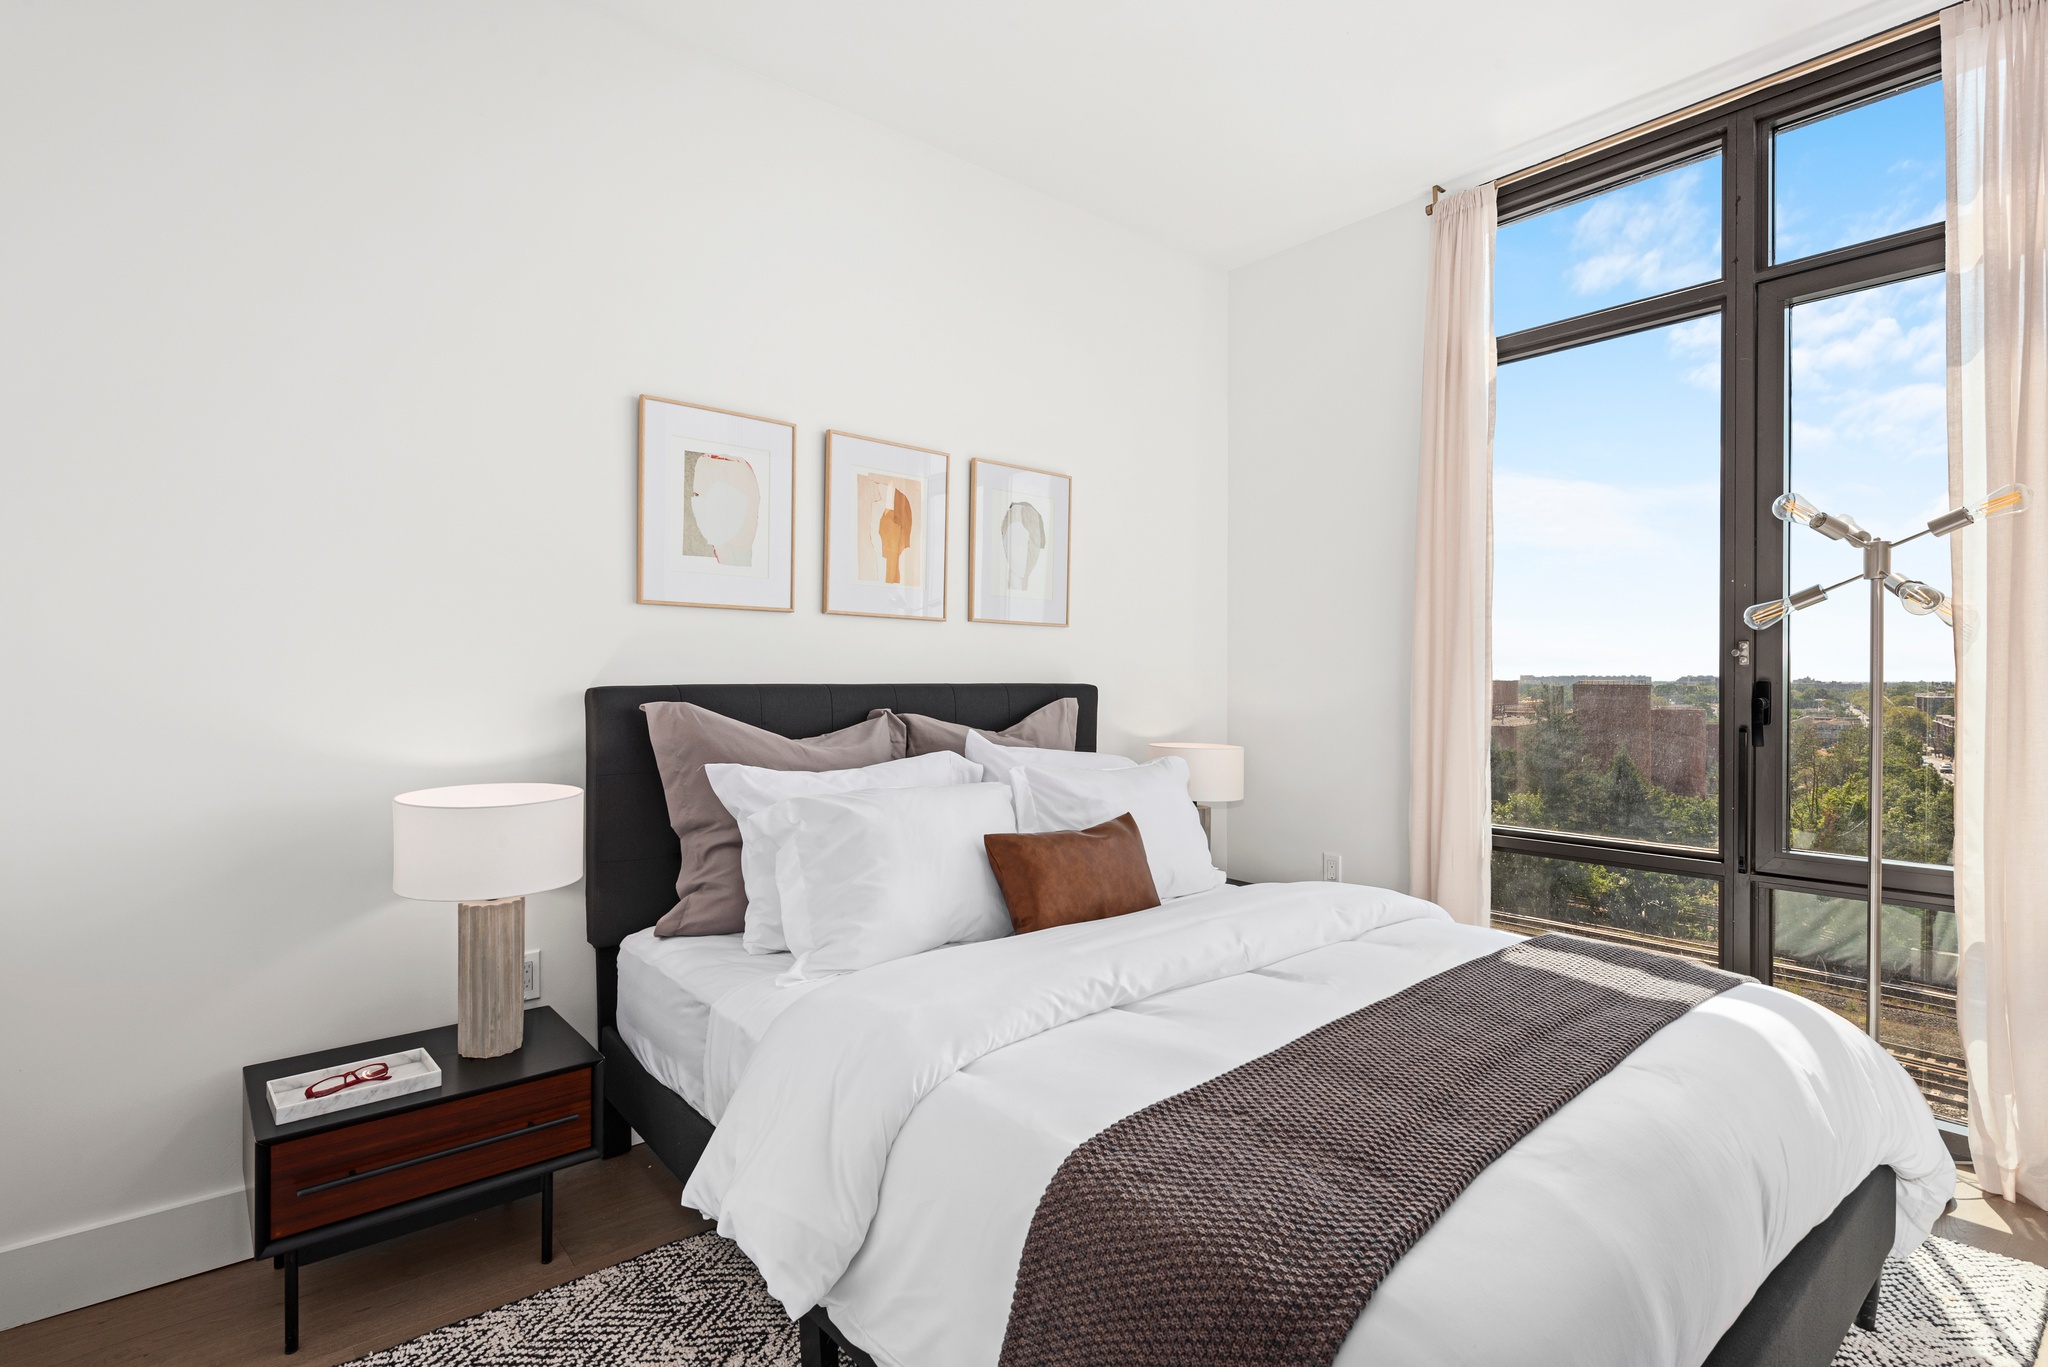 Bright bedroom with white walls, white and brown bedding, dark headboard with tryptic art above, large windows and matching drawer night stands with lamps